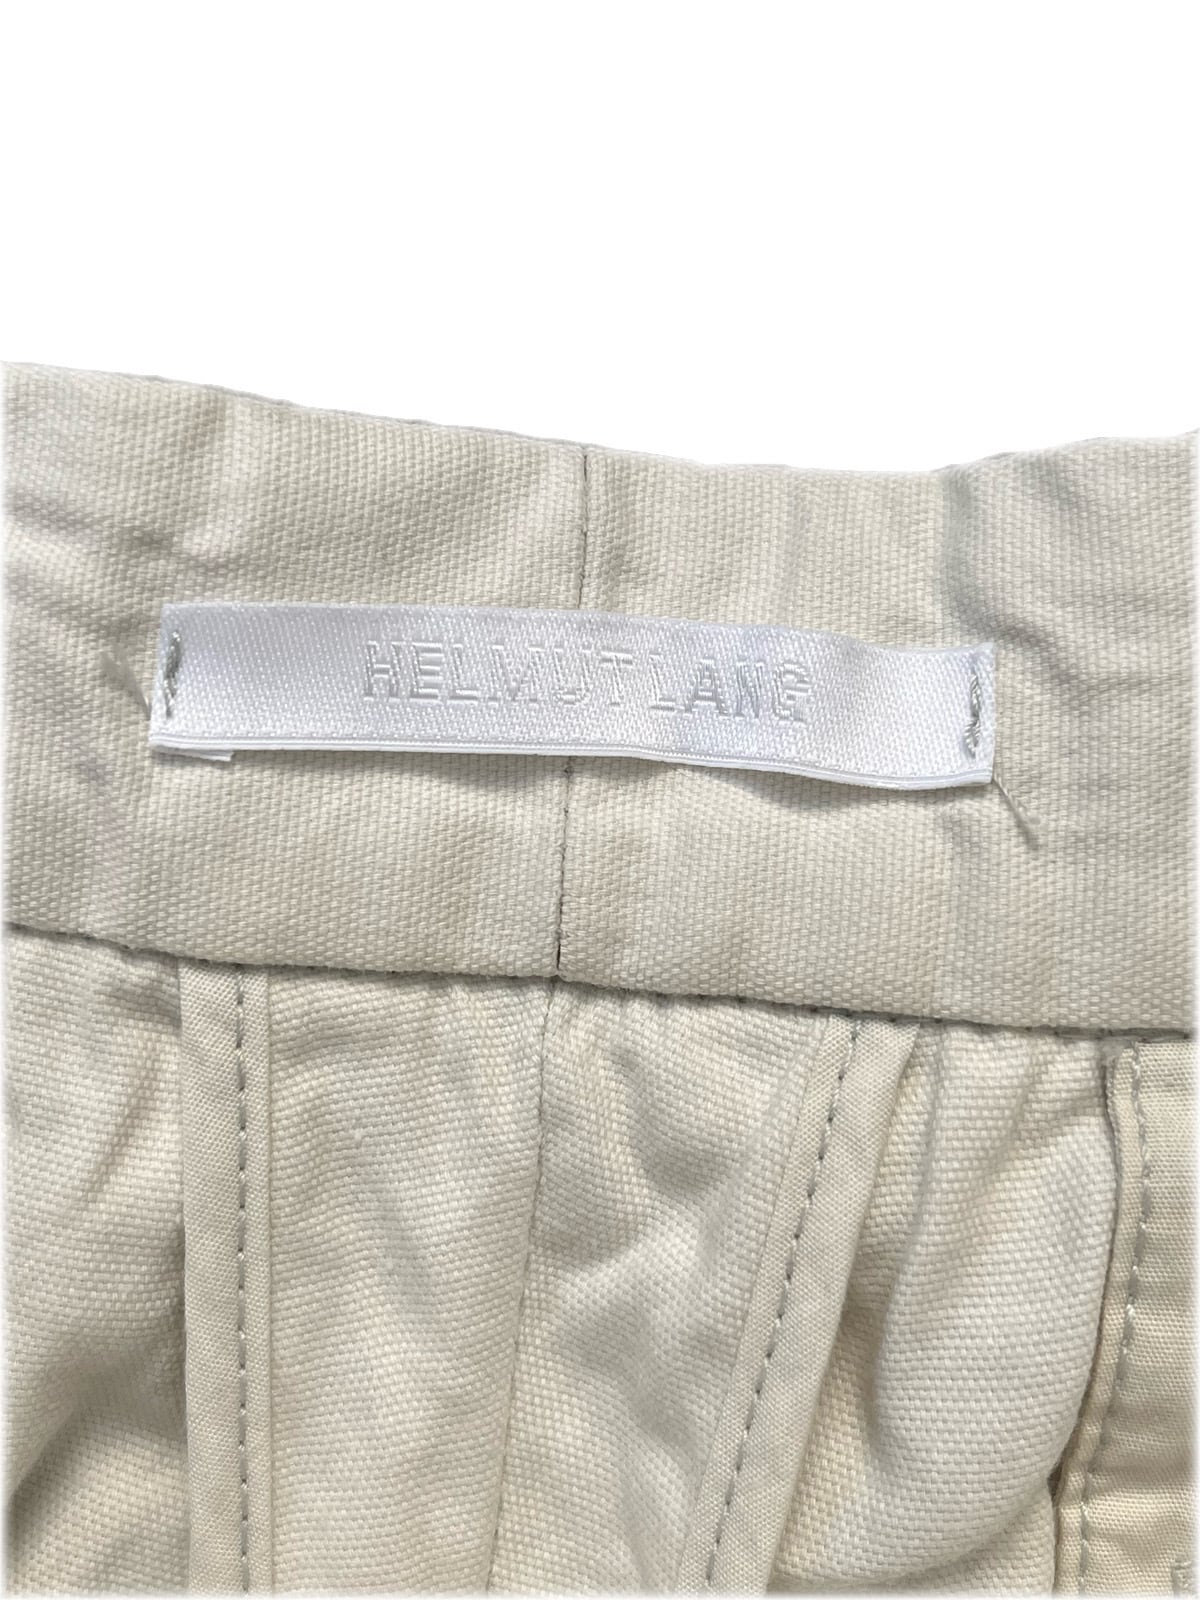 helmut lang ヘルムートラング 本人期 03ss inside out cargo pants